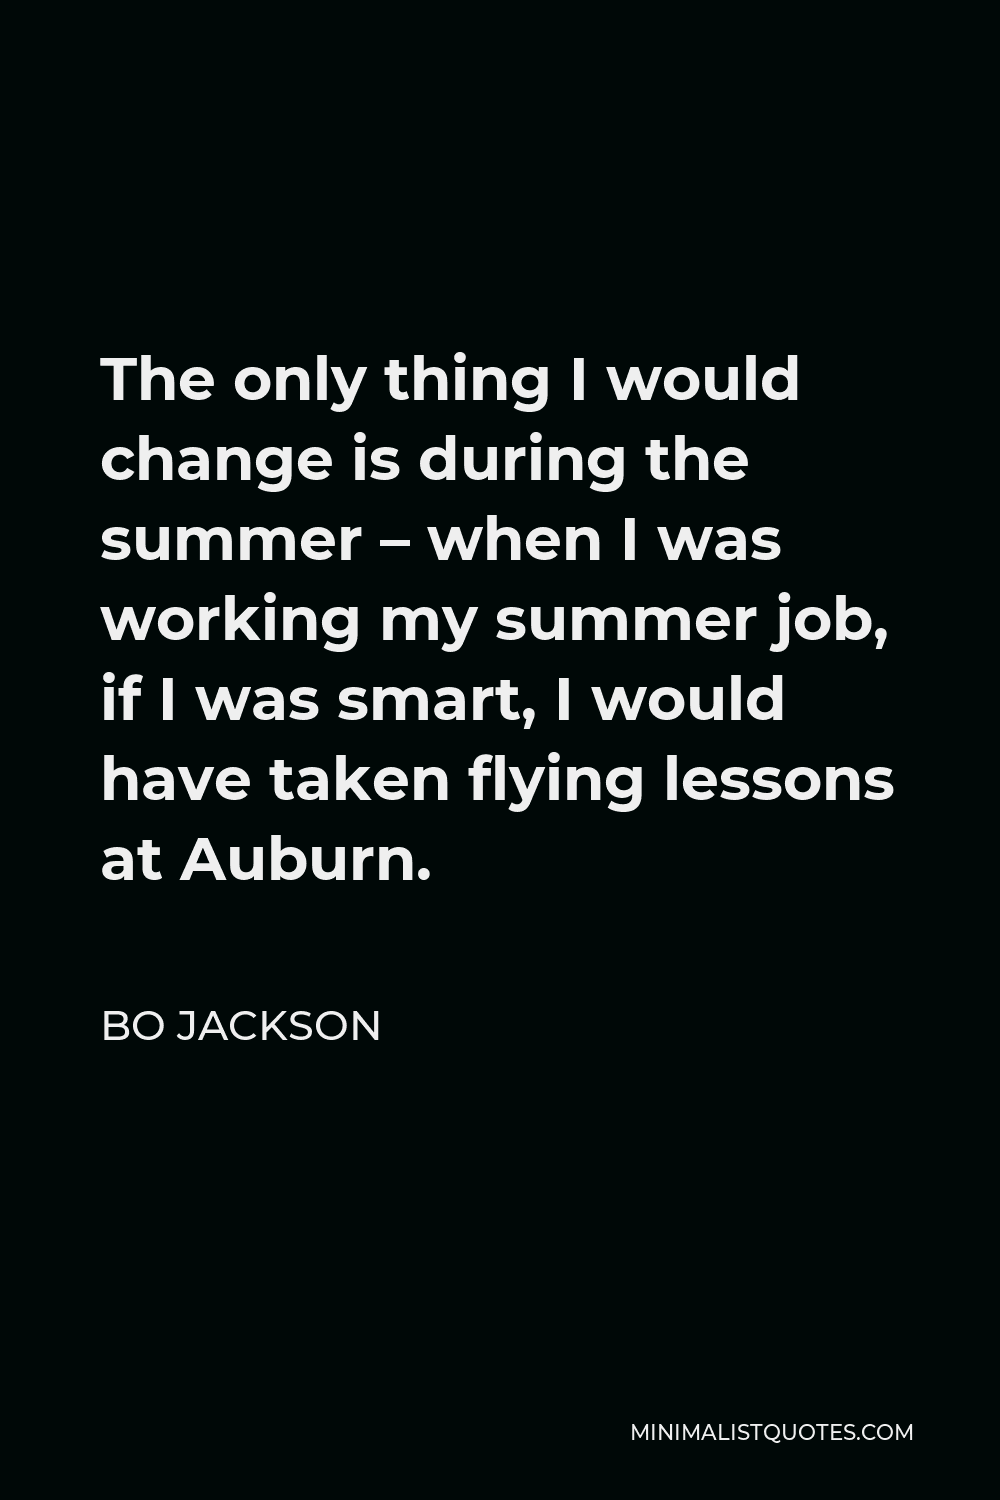 Bo Jackson Quote - The only thing I would change is during the summer – when I was working my summer job, if I was smart, I would have taken flying lessons at Auburn.